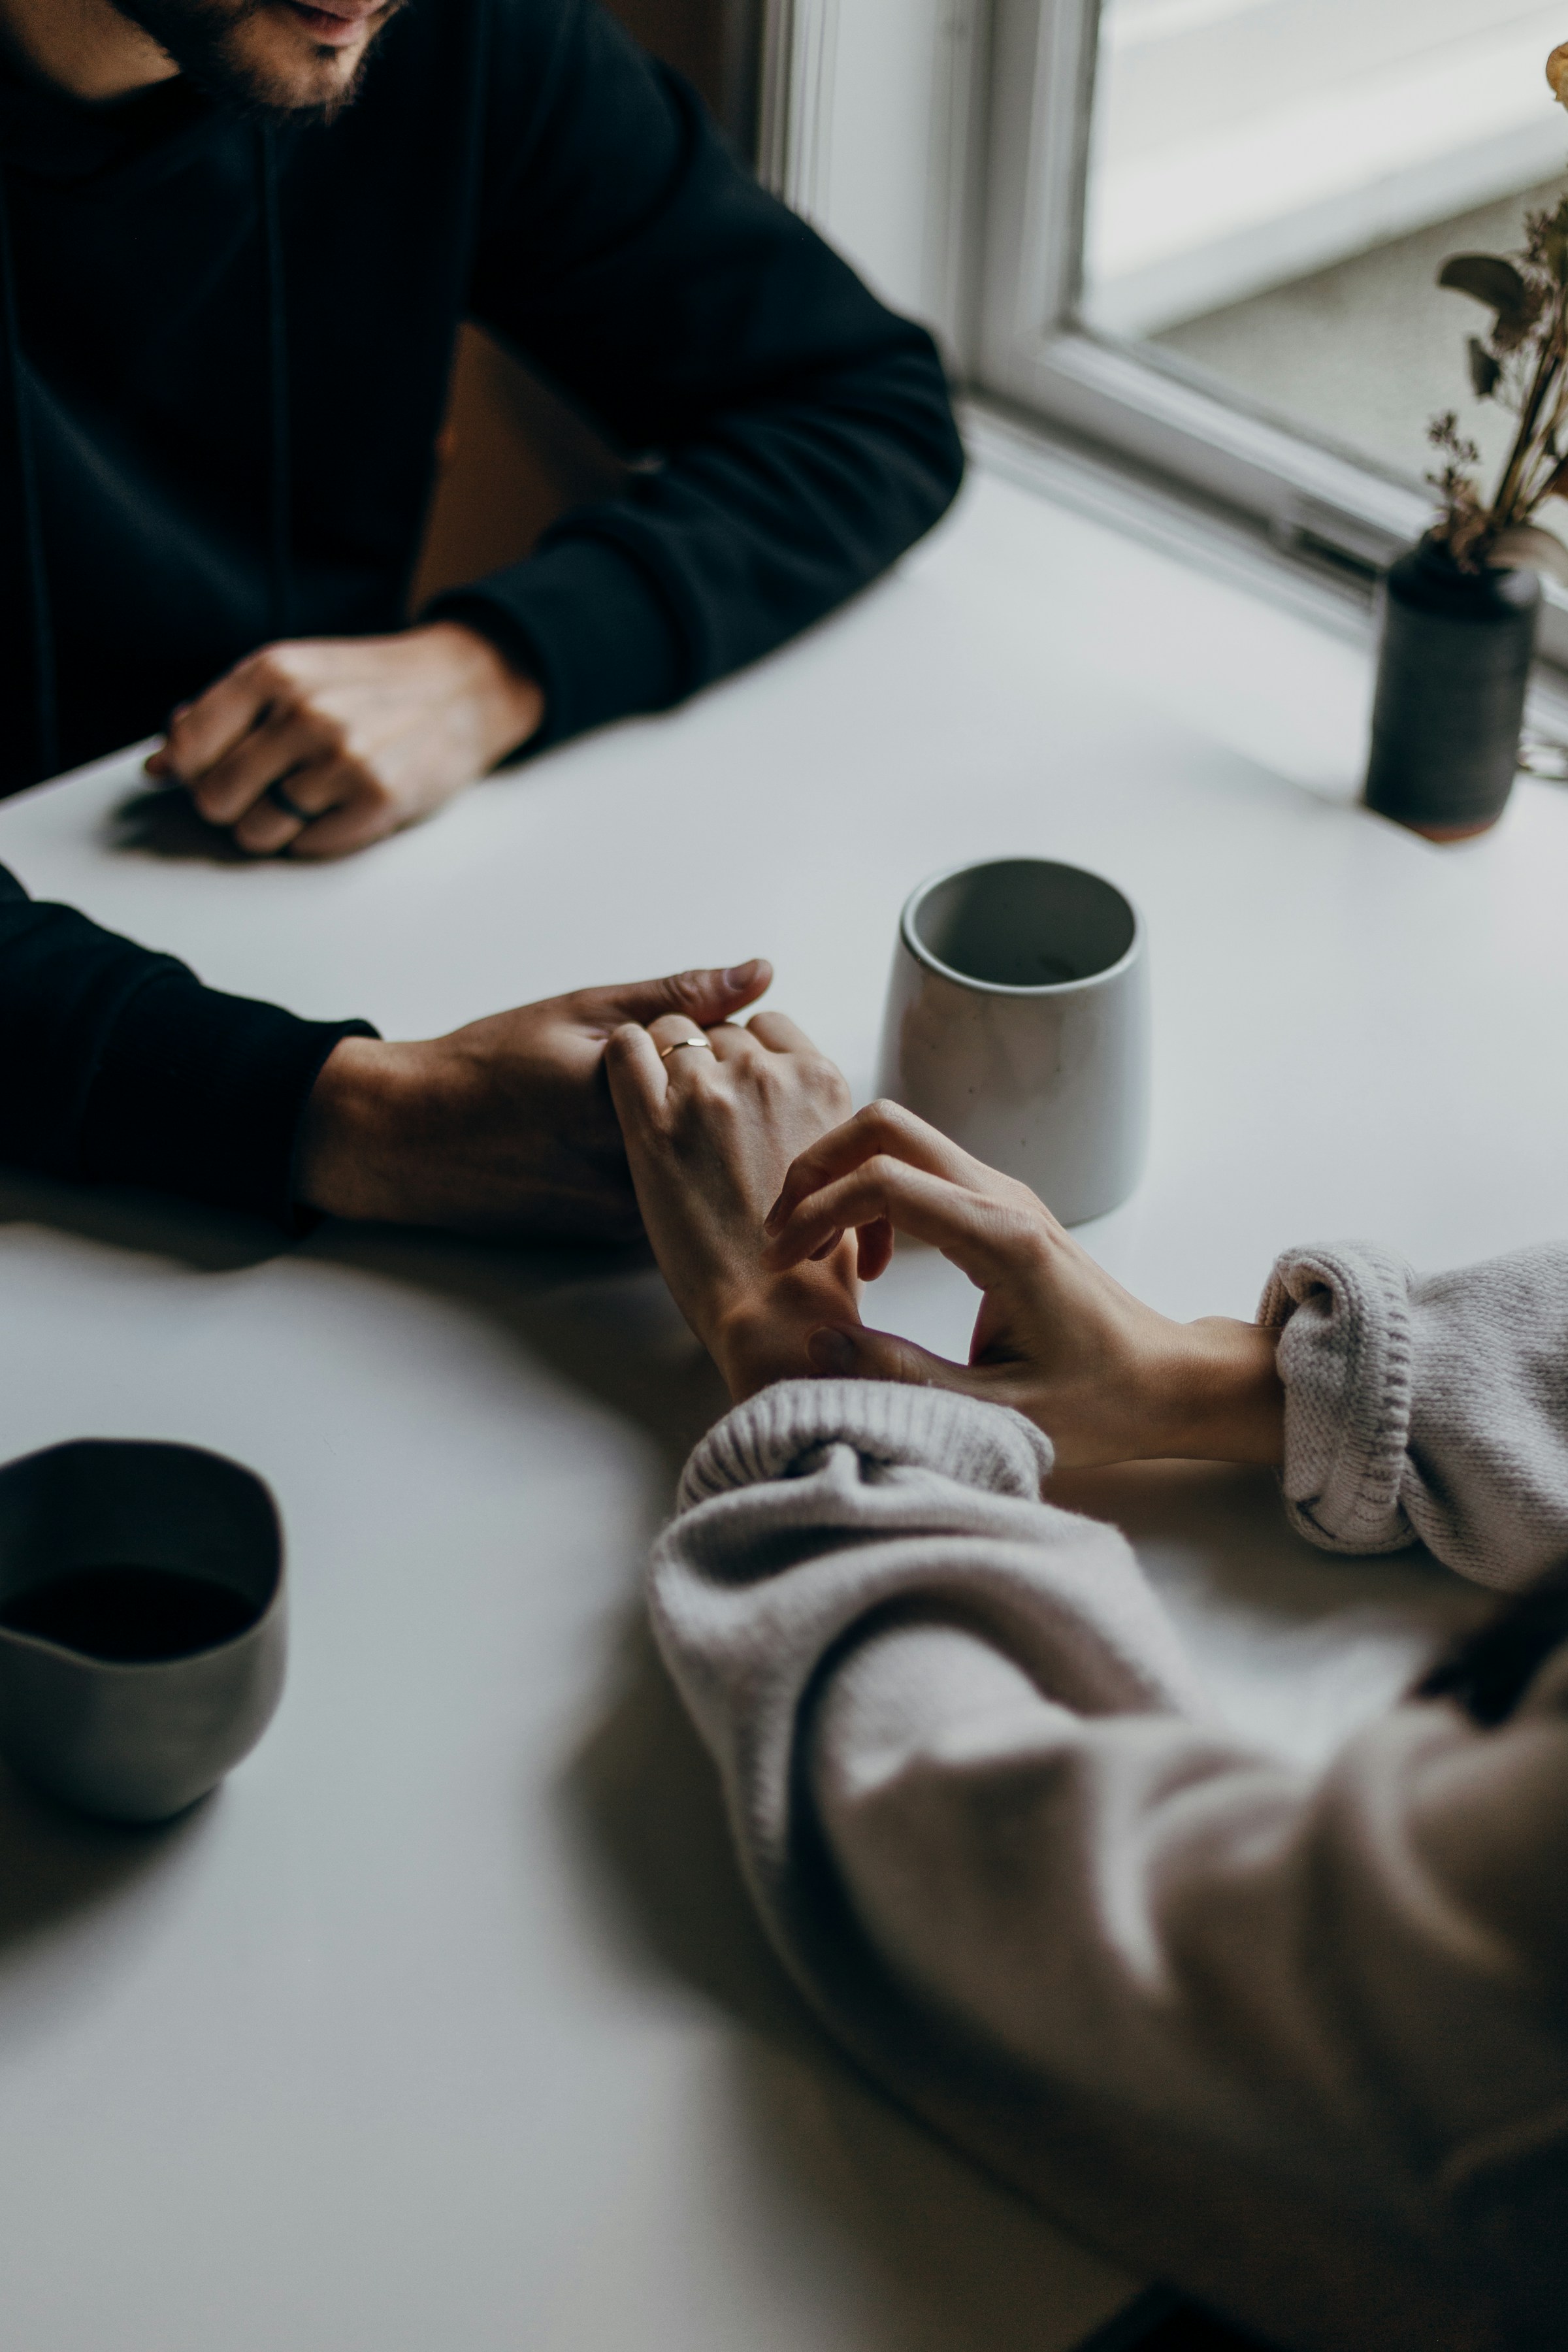 A couple holding hands across the table | Source: Unsplash